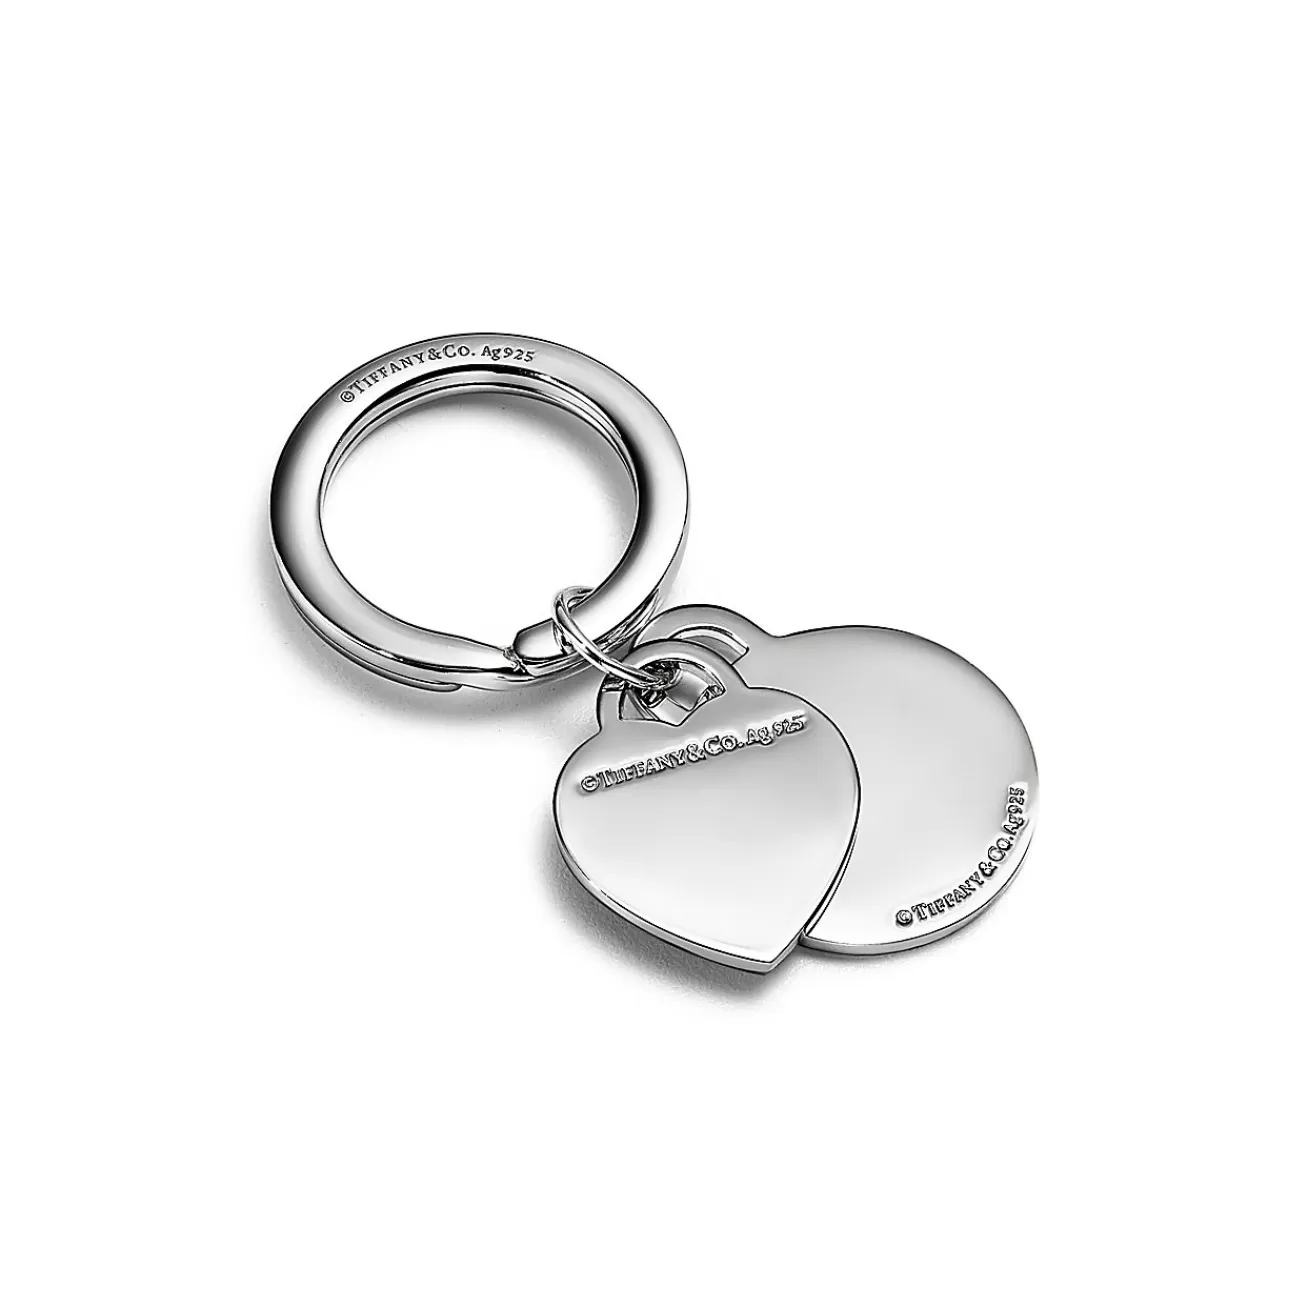 Tiffany & Co. Return to Tiffany® Round and Heart Tag Key Ring in Silver with Tiffany Blue® | ^Women Gifts $1,500 & Under | Tiffany Blue® Gifts